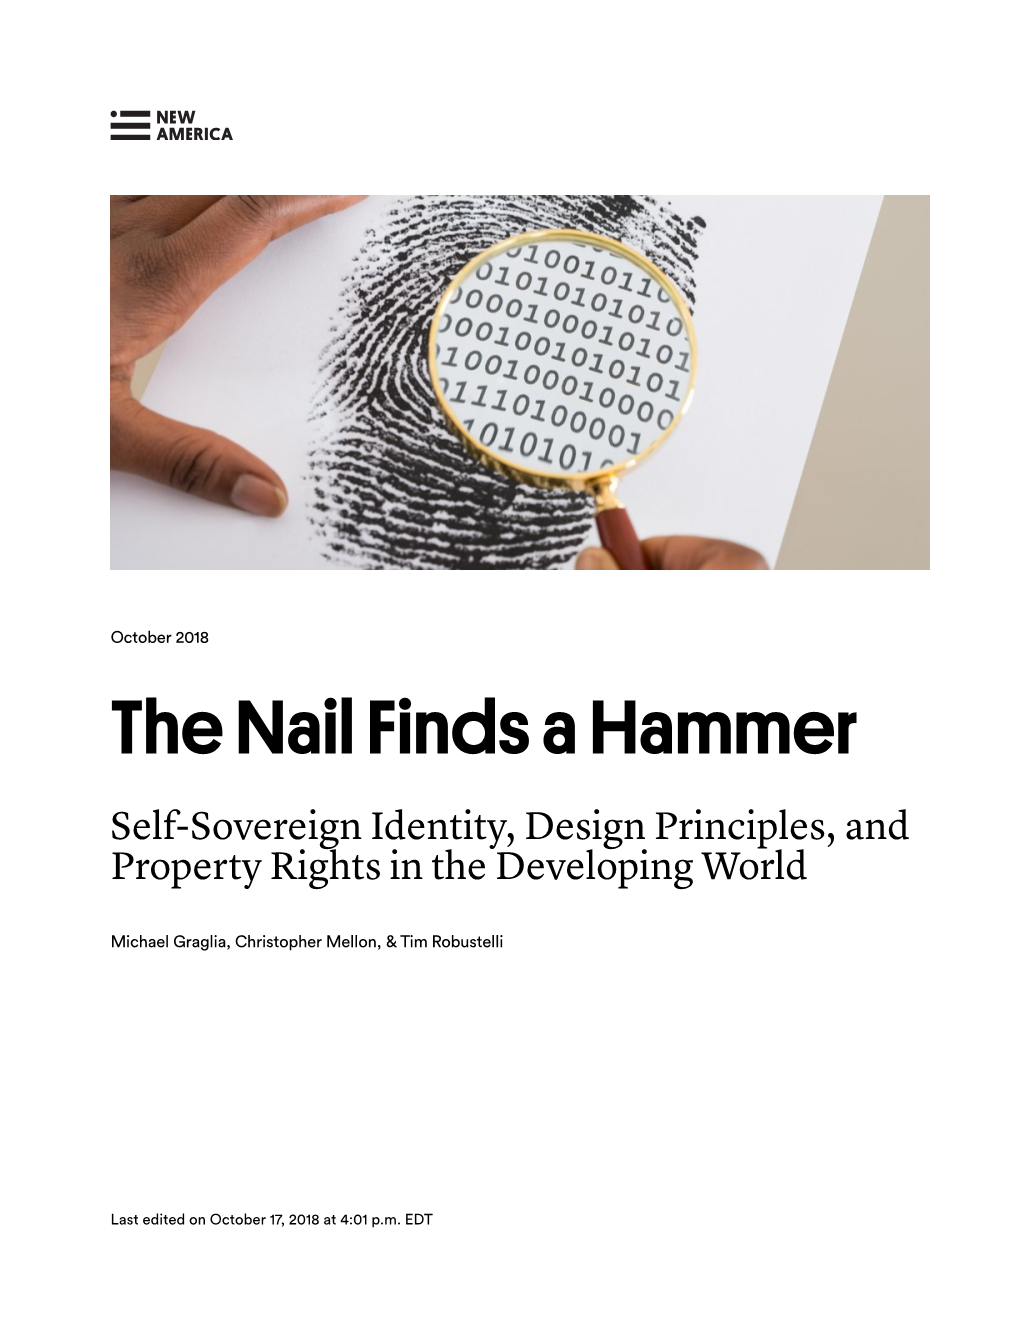 The Nail Finds a Hammer